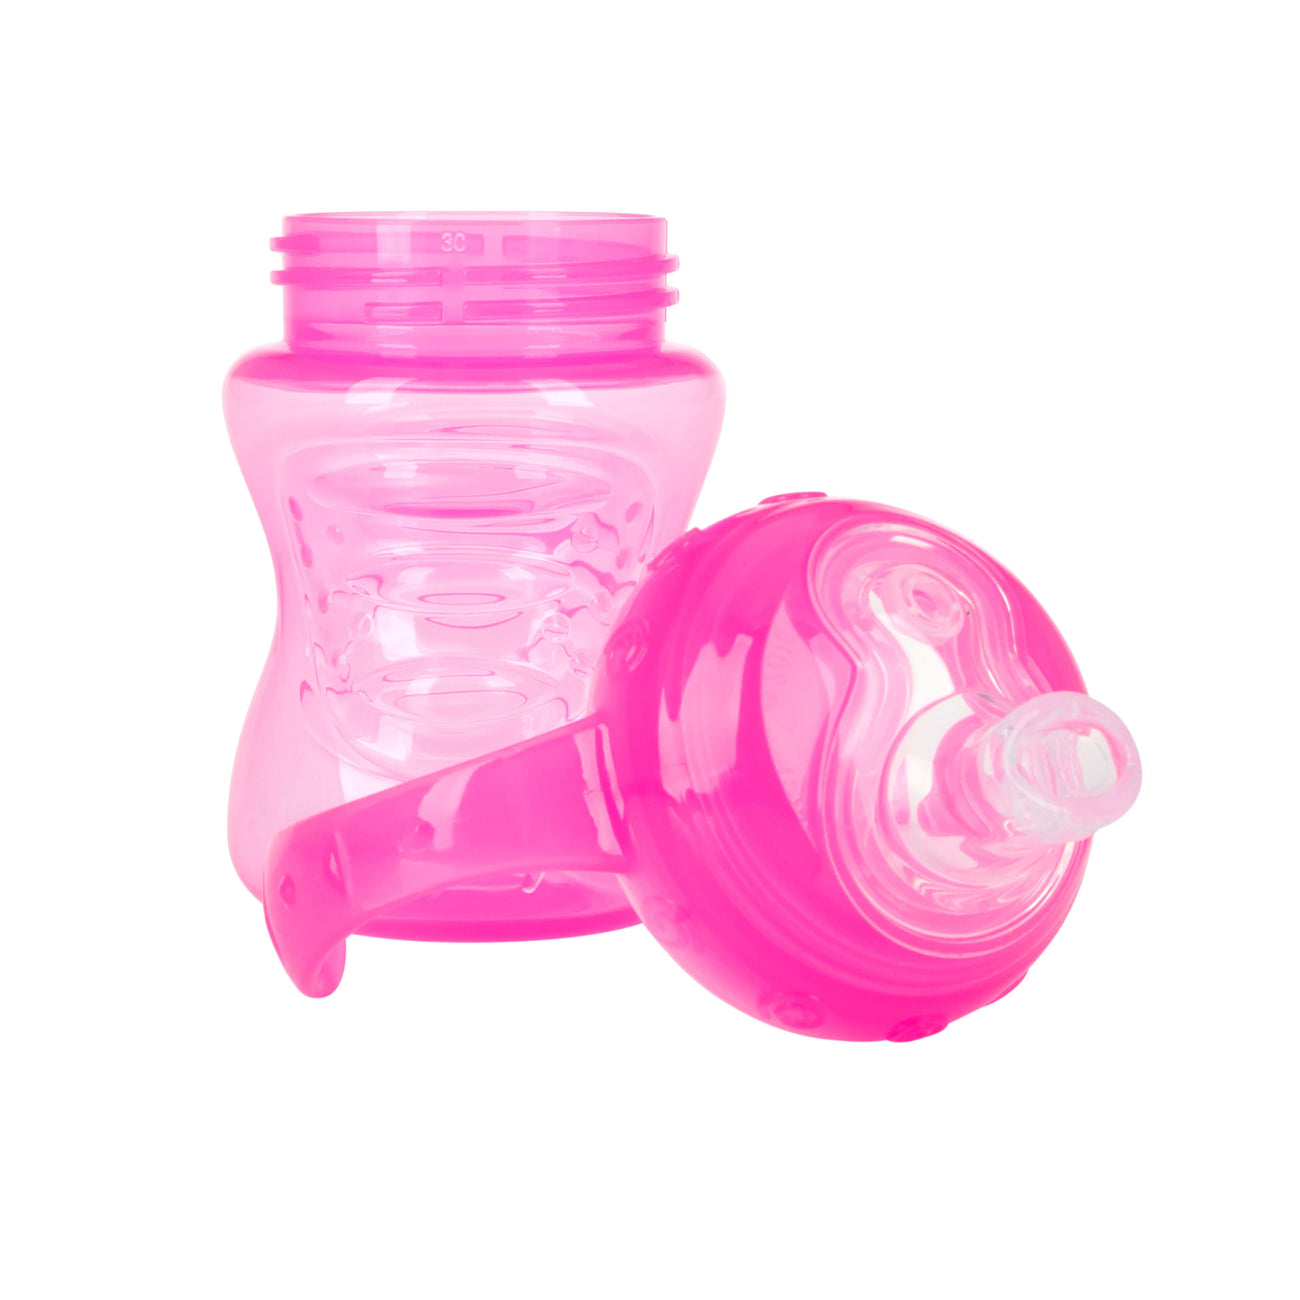 No-Spill Soft Spout Grip N' Sip Trainer Cup - Nuby US